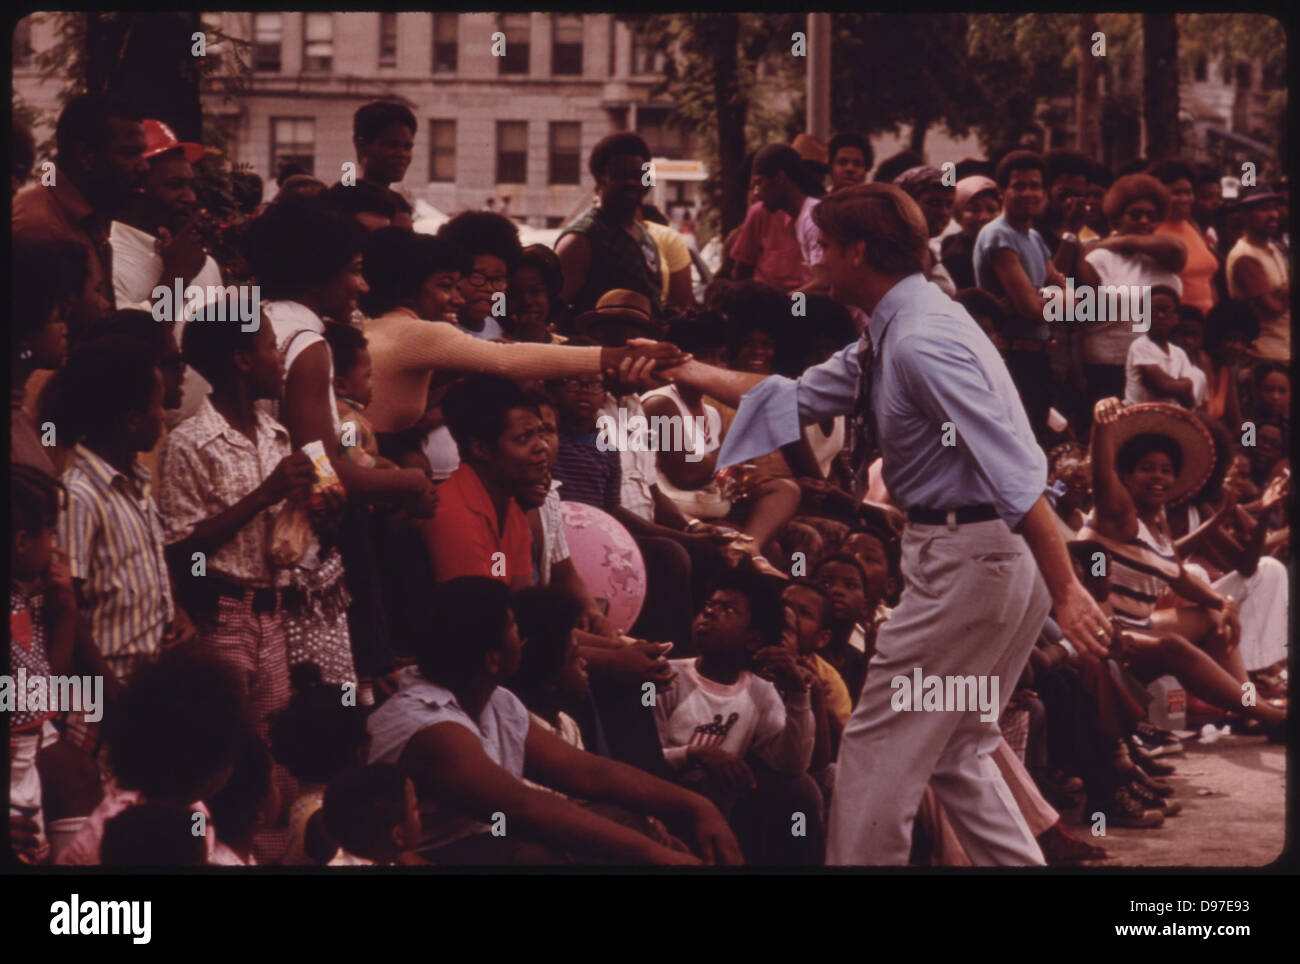 Illinois Governor Dan Walker Greets Chicago Constituents During The Bud Billiken Day Parade, 08/1973 Stock Photo